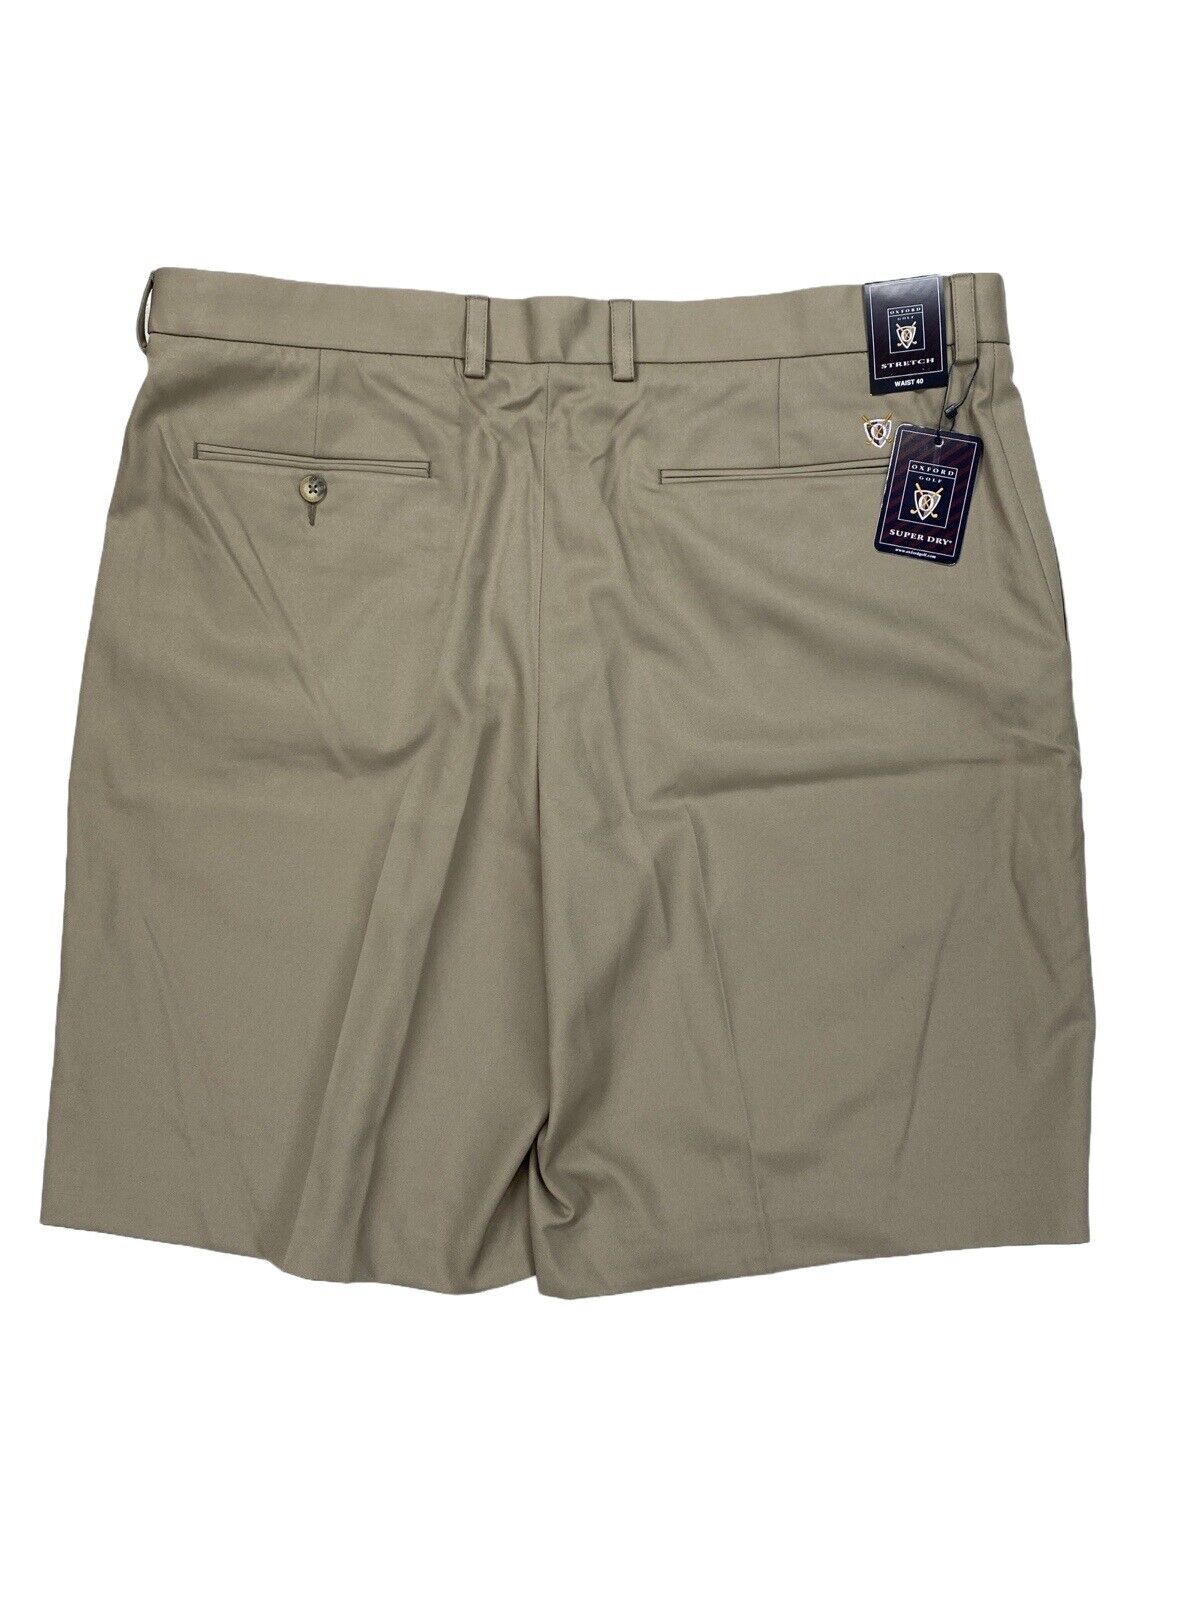 NEW Oxford Golf Men's Brown Flat Front Stretch Golf Shorts - 40